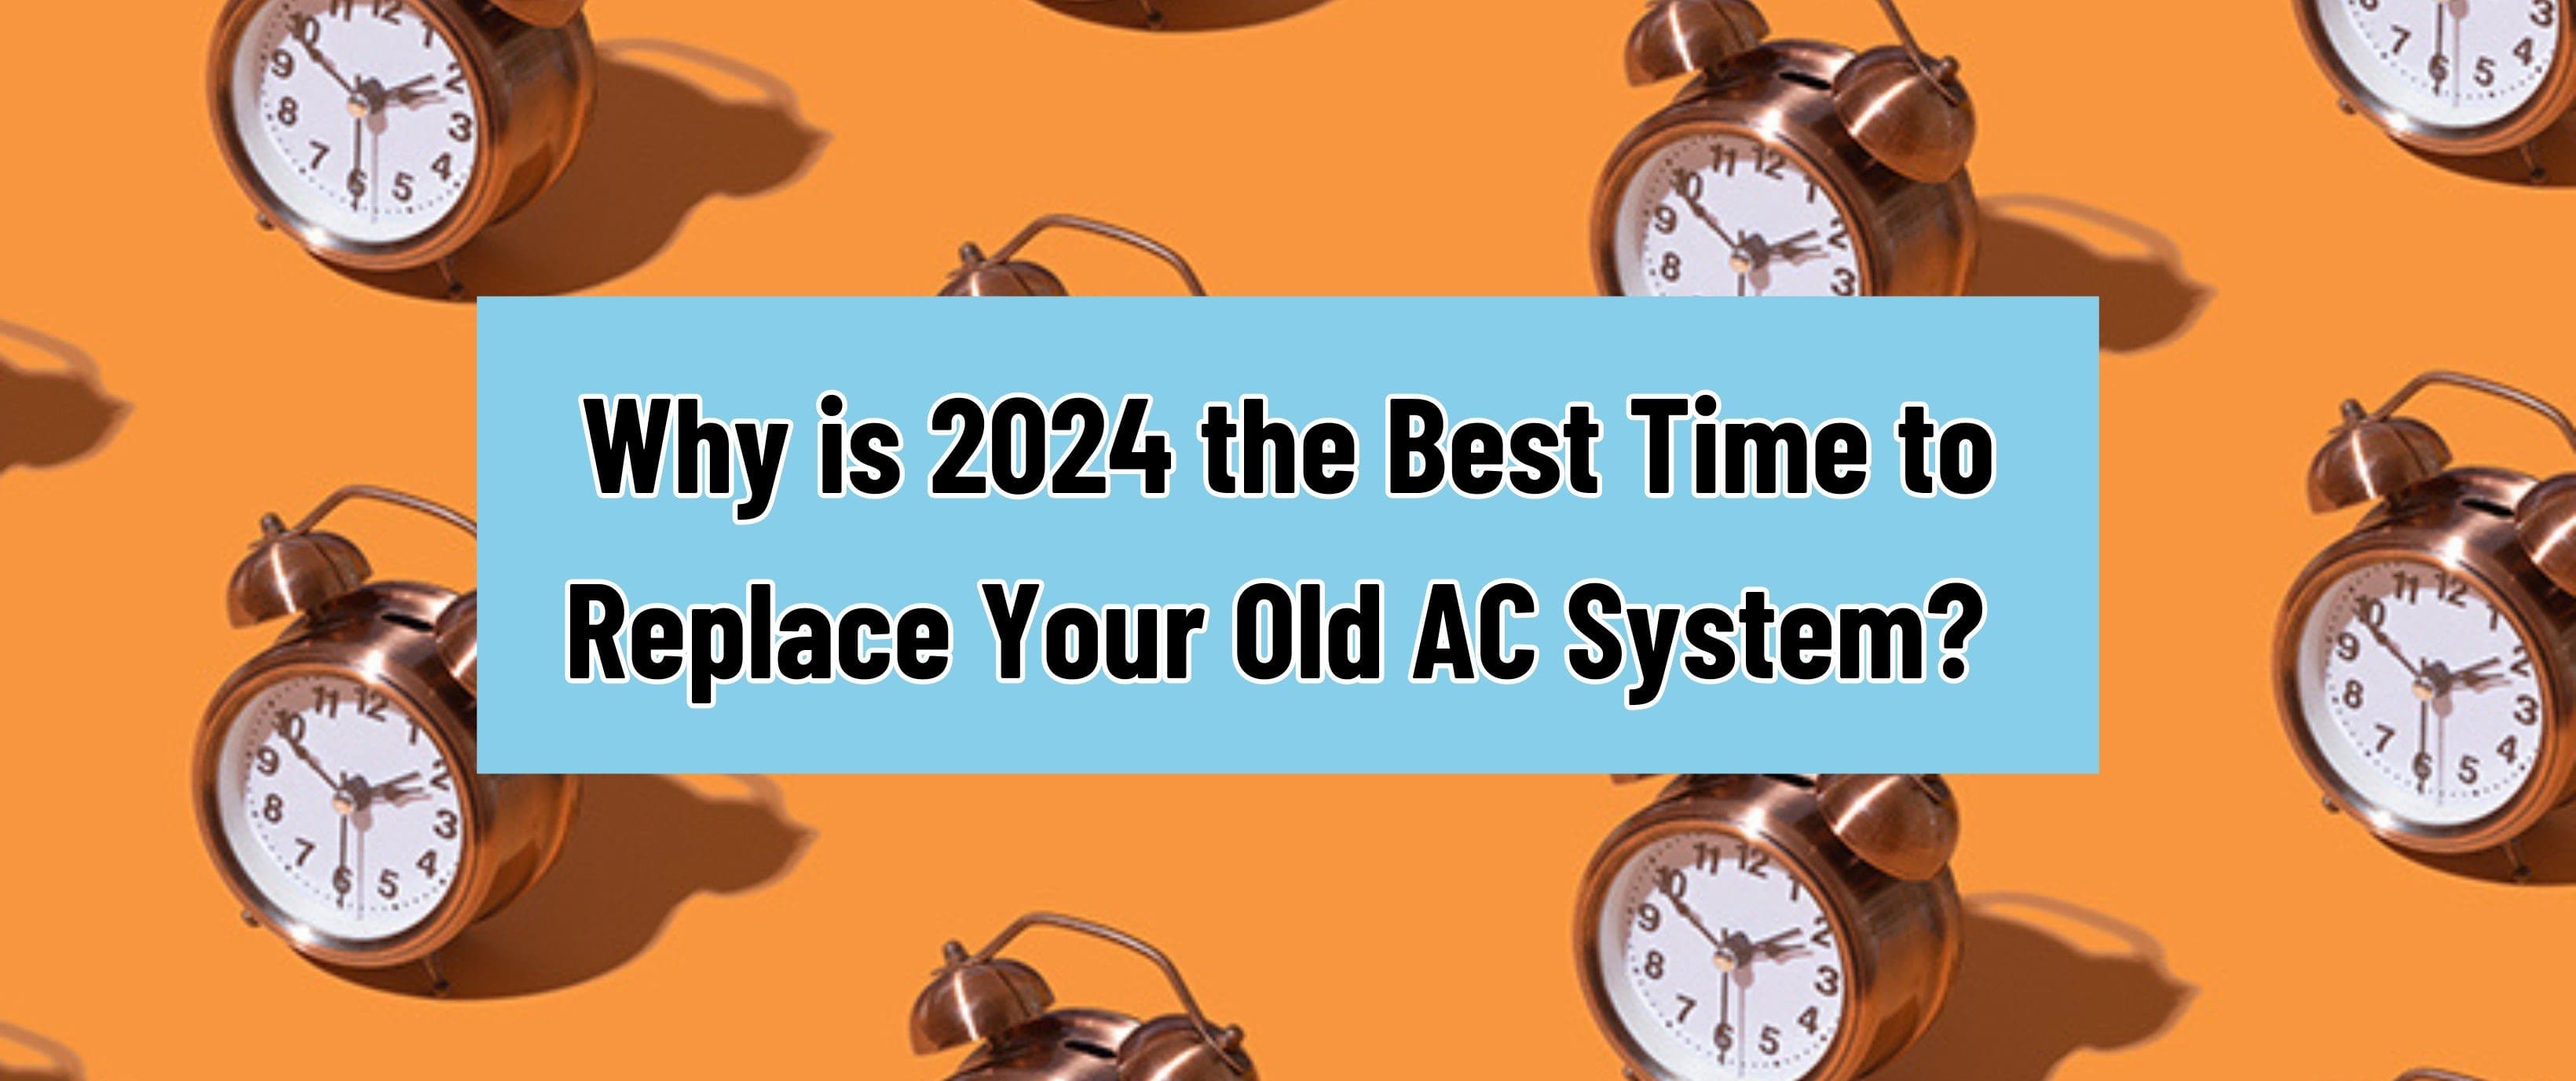 Why is 2024 the Best Time to Replace Your Old AC System